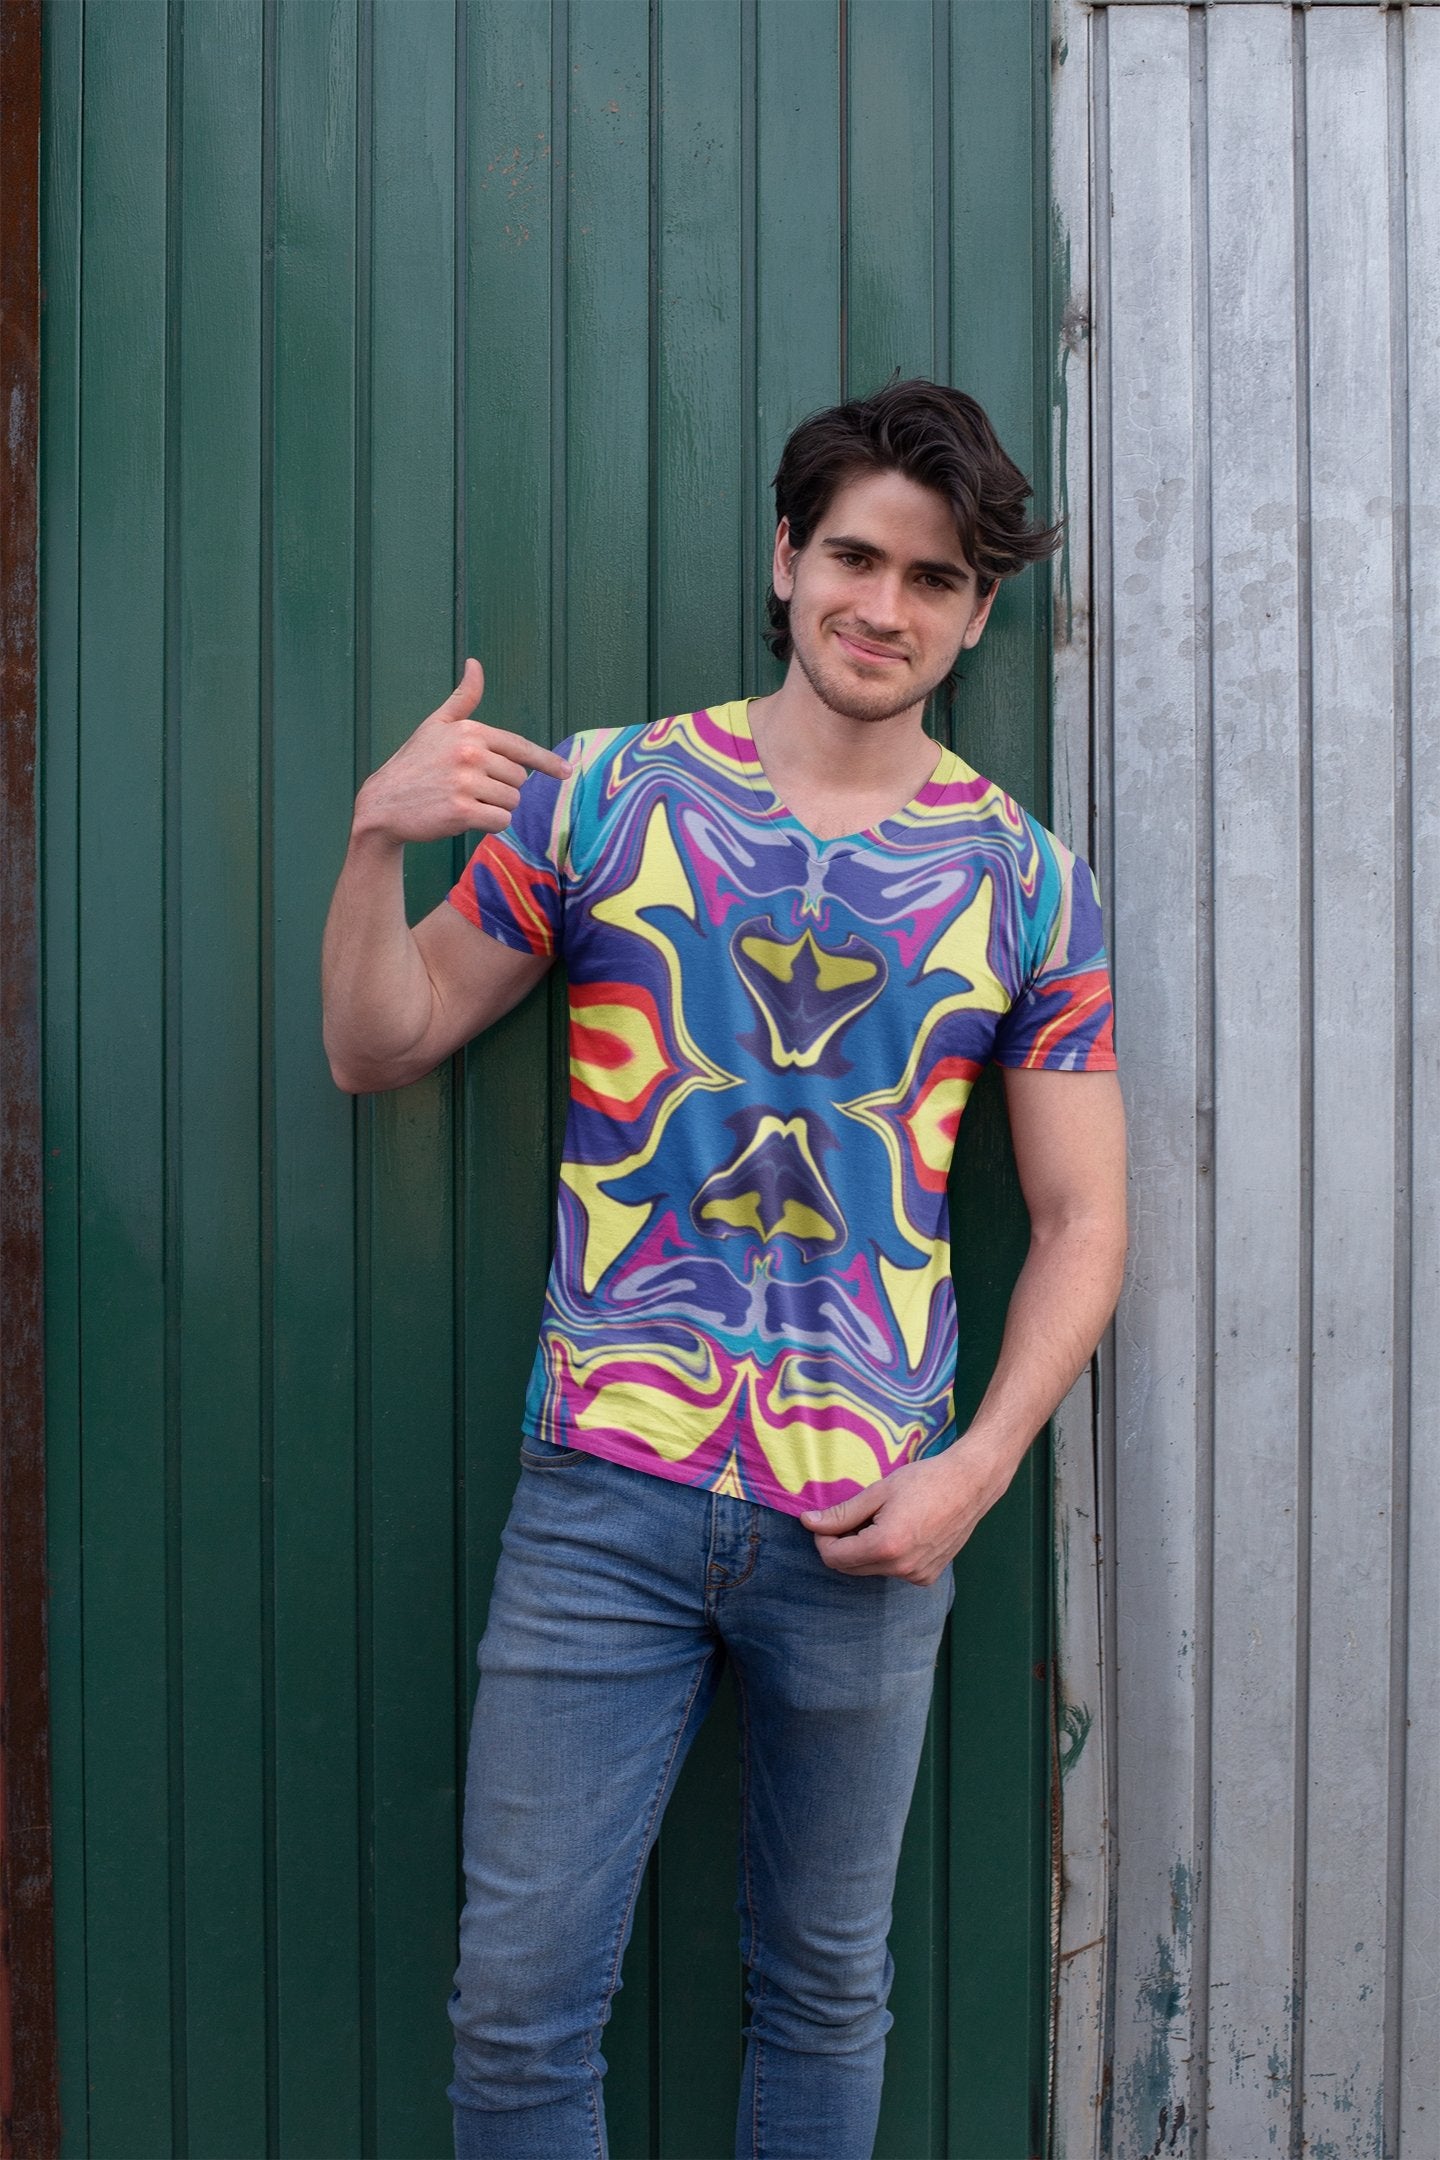 Psychedelic Funky Design Blue Camo T-Shirt